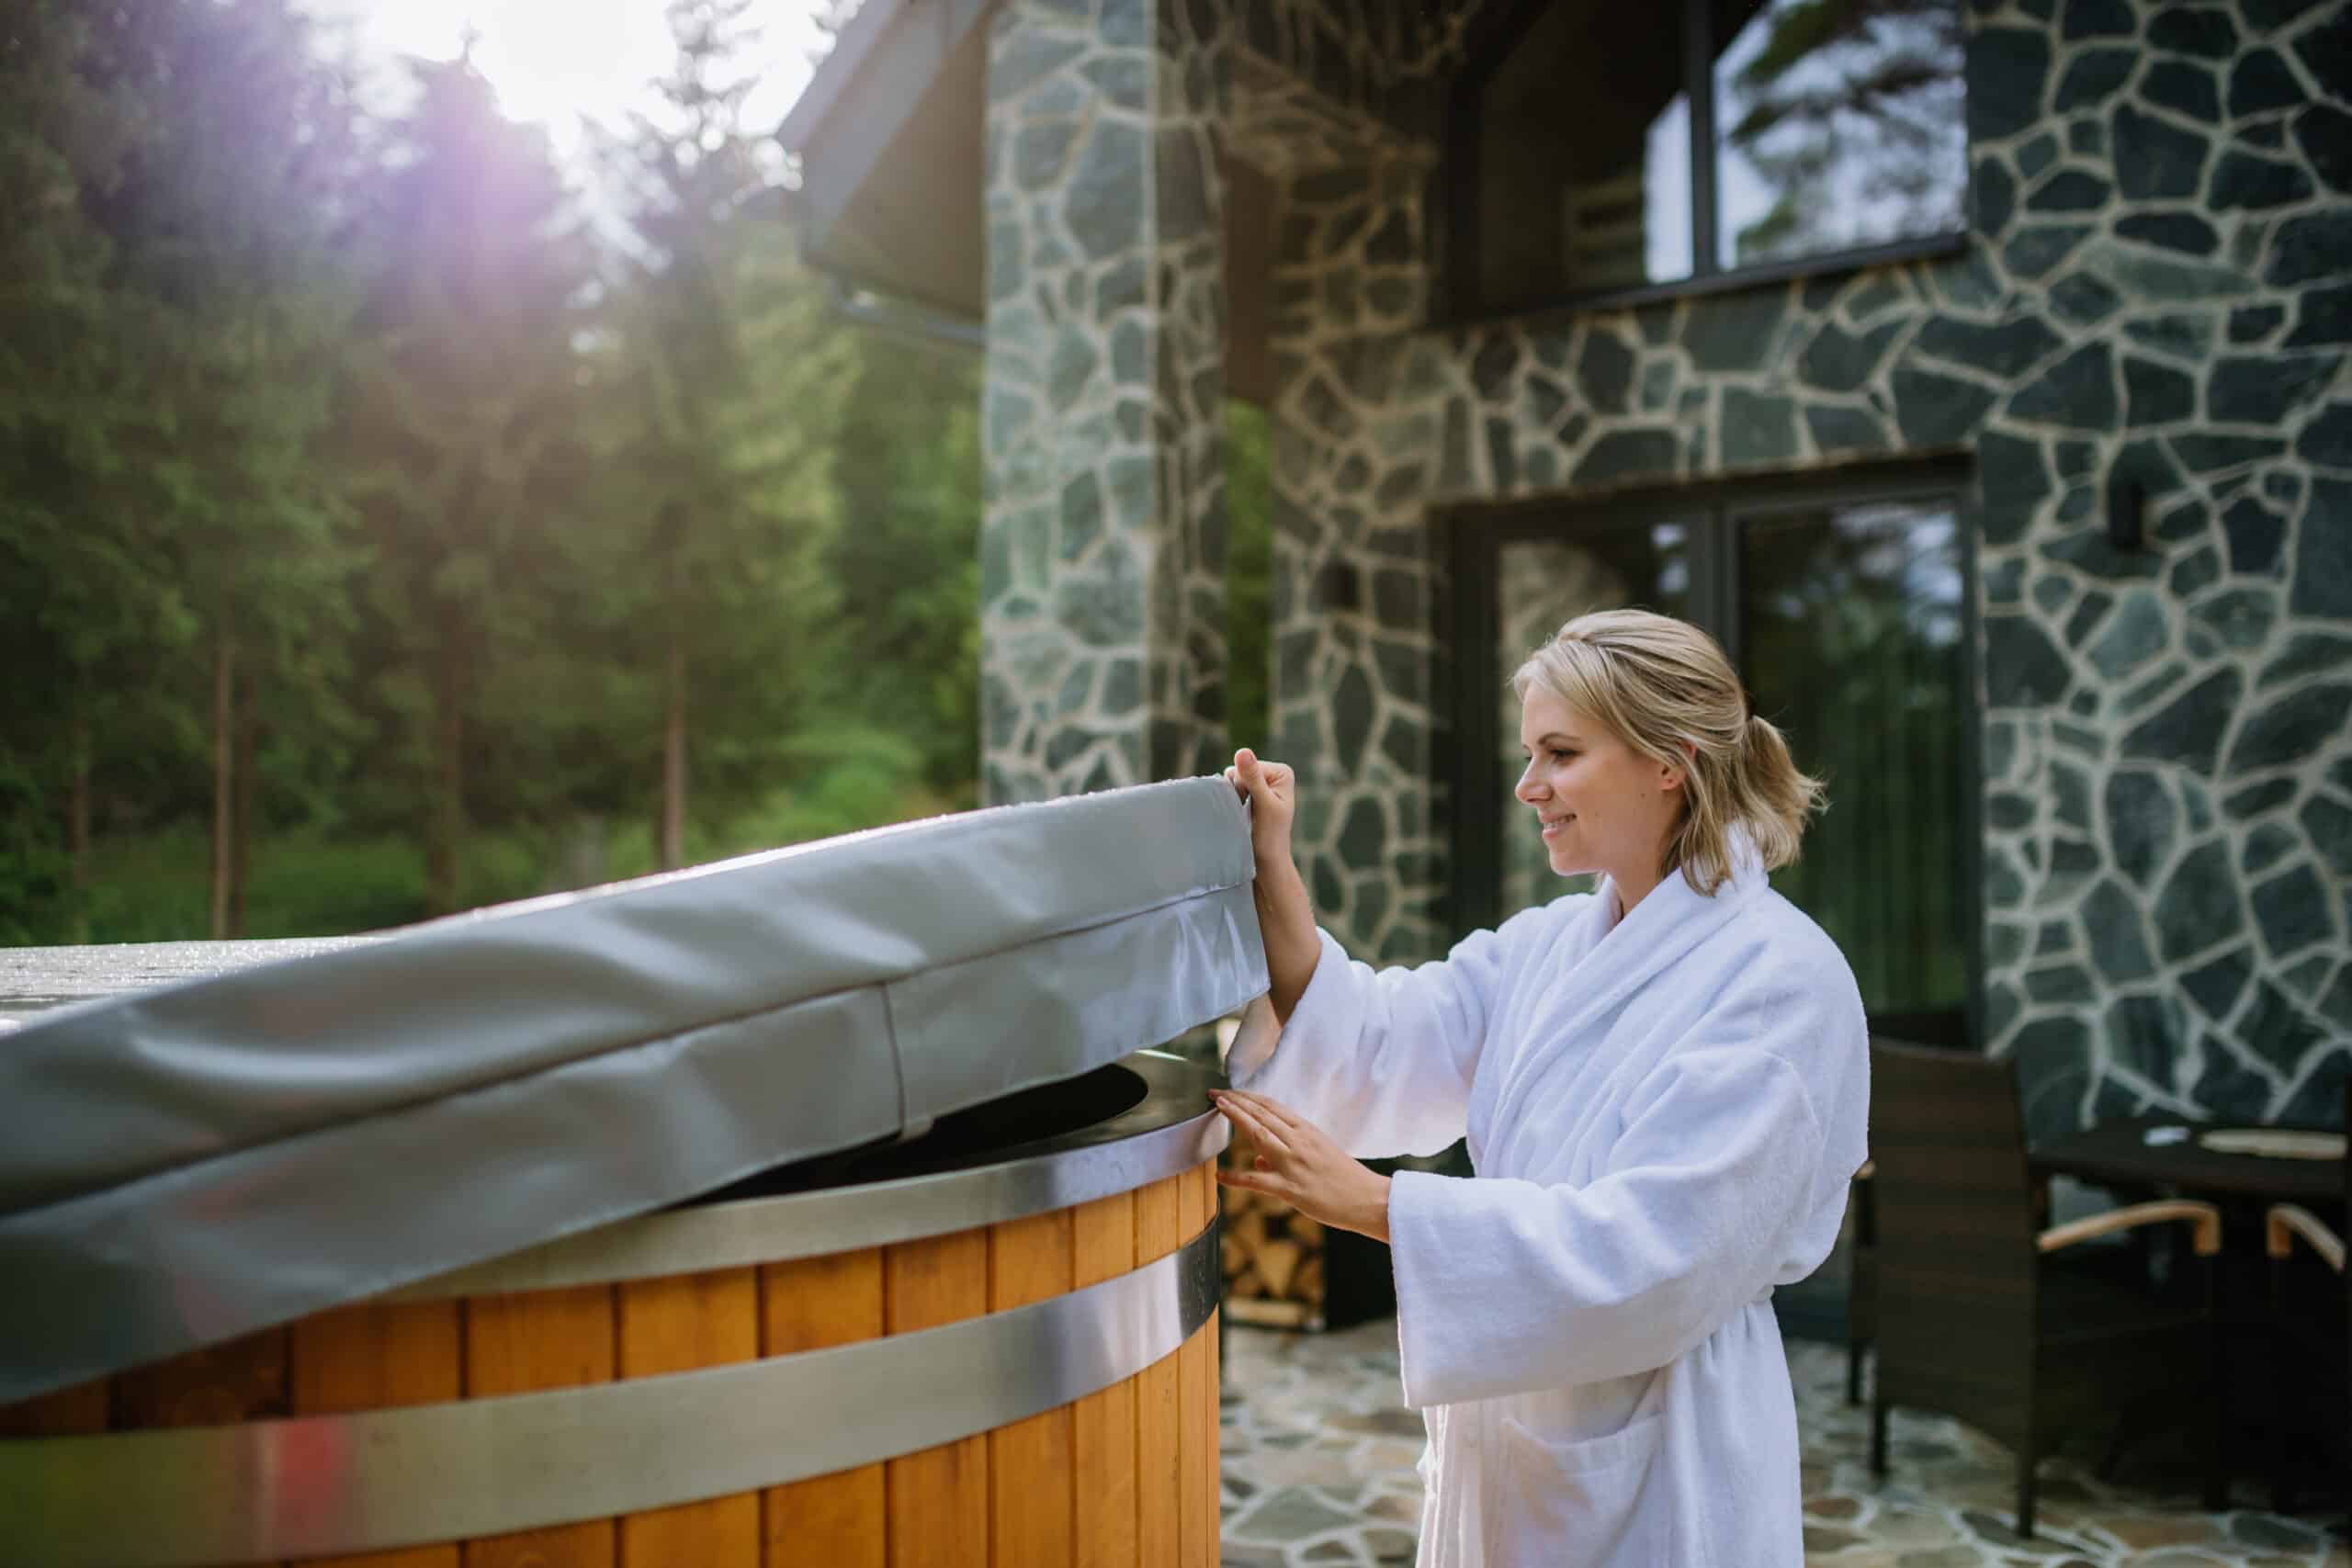 woman in bathrobe opening lid of hot tub, checking temperature, ready for home spa procedure in hot tub outdoors. wellness, body care, hygiene concept.